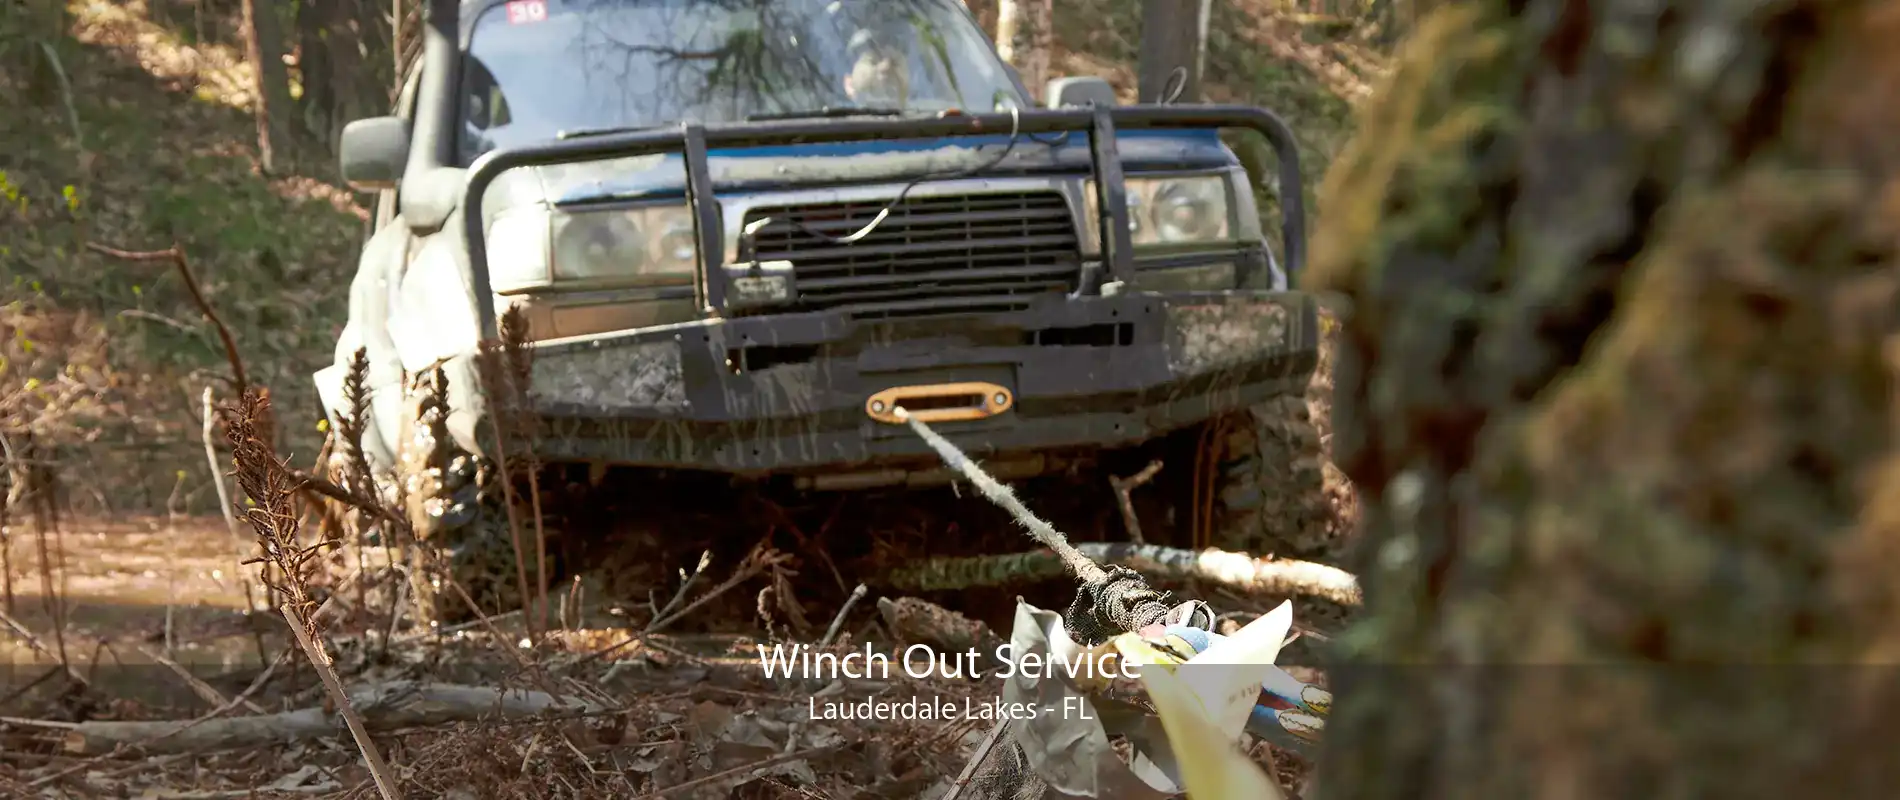 Winch Out Service Lauderdale Lakes - FL